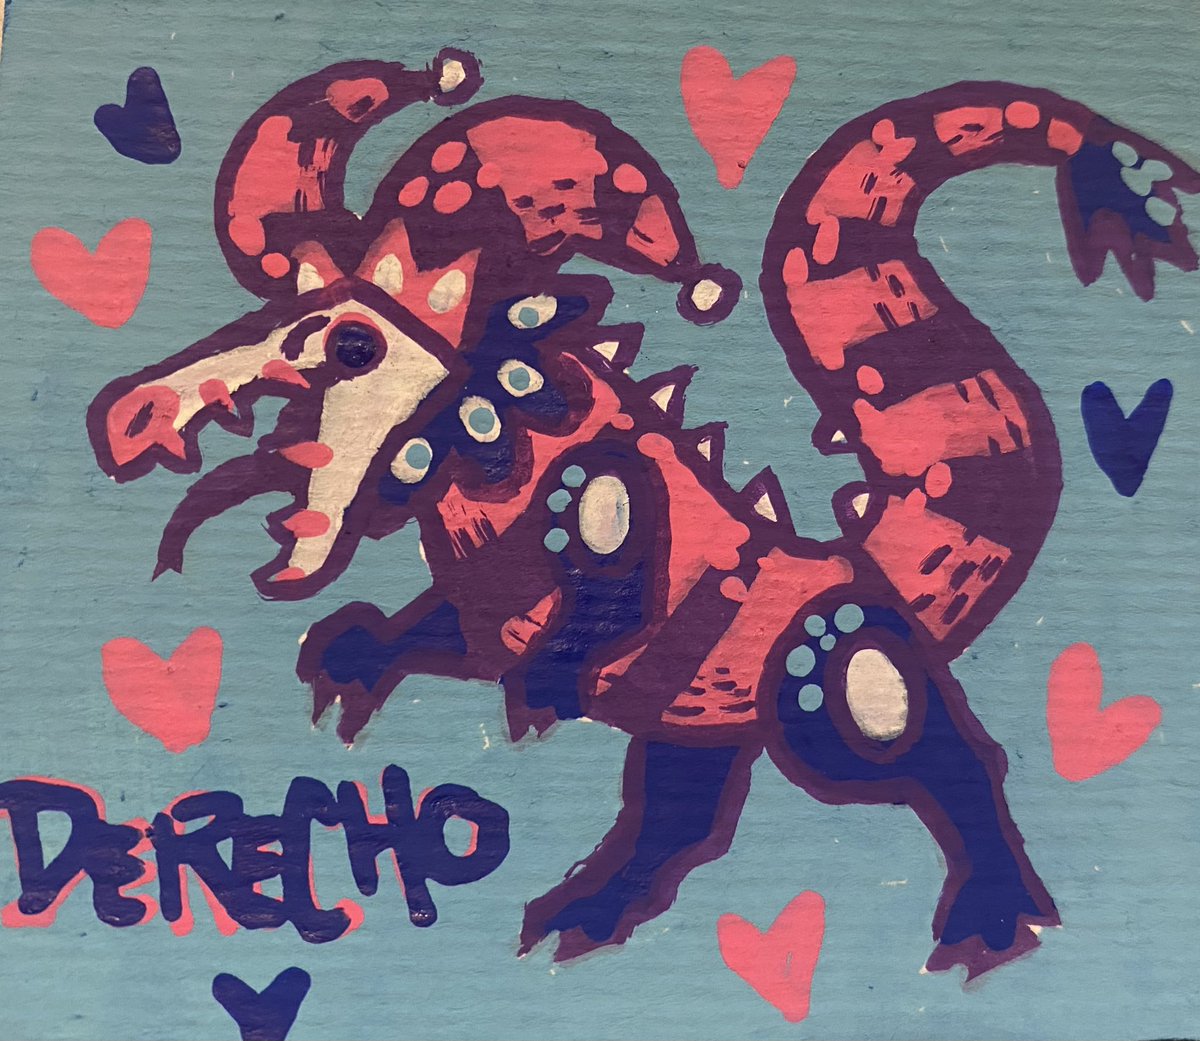 Better color image of the Derecho posca doodle. I really like it. Might remake in digital. https://t.co/VtzjkF7ooC